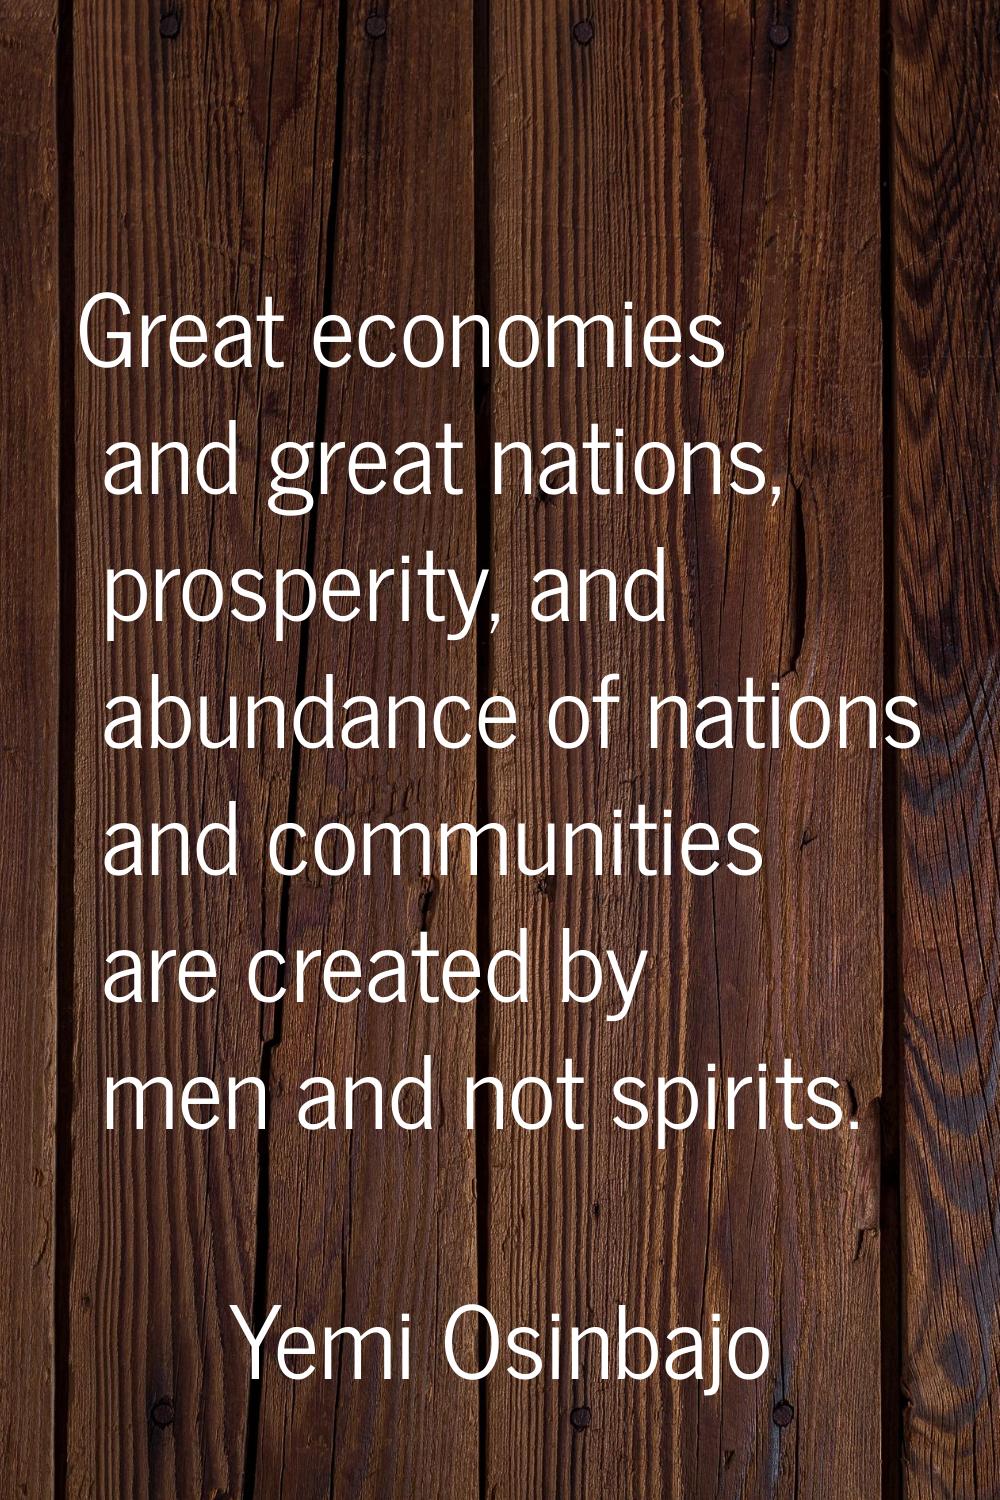 Great economies and great nations, prosperity, and abundance of nations and communities are created